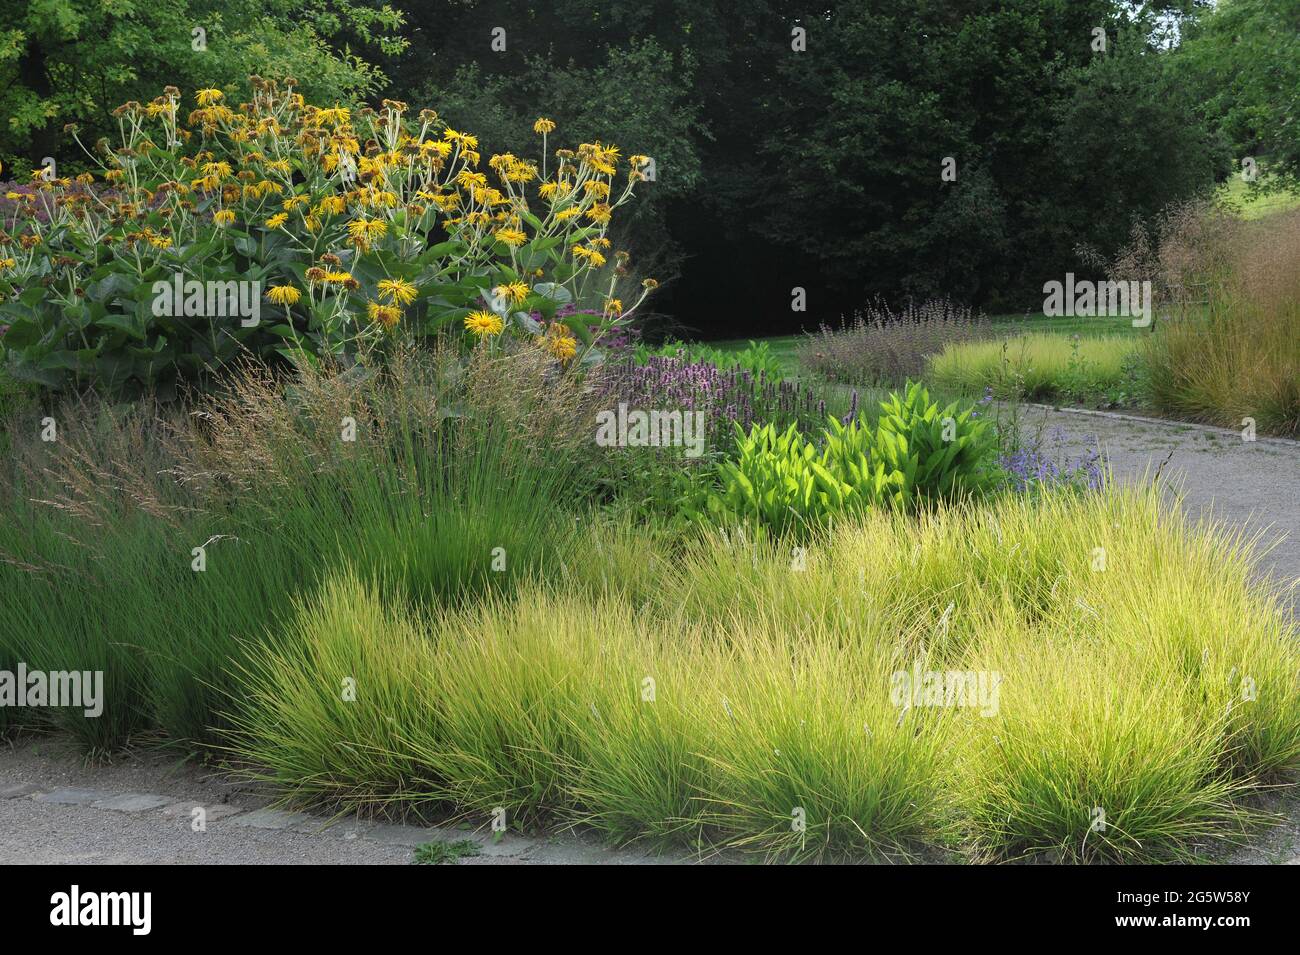 HAMM, GERMANY - 24 JULY 2016: Autumn moor-grass (Sesleria autumnalis) and Inula magnifica Sonnenstrahl in a flower border in the Maximilianpark Stock Photo